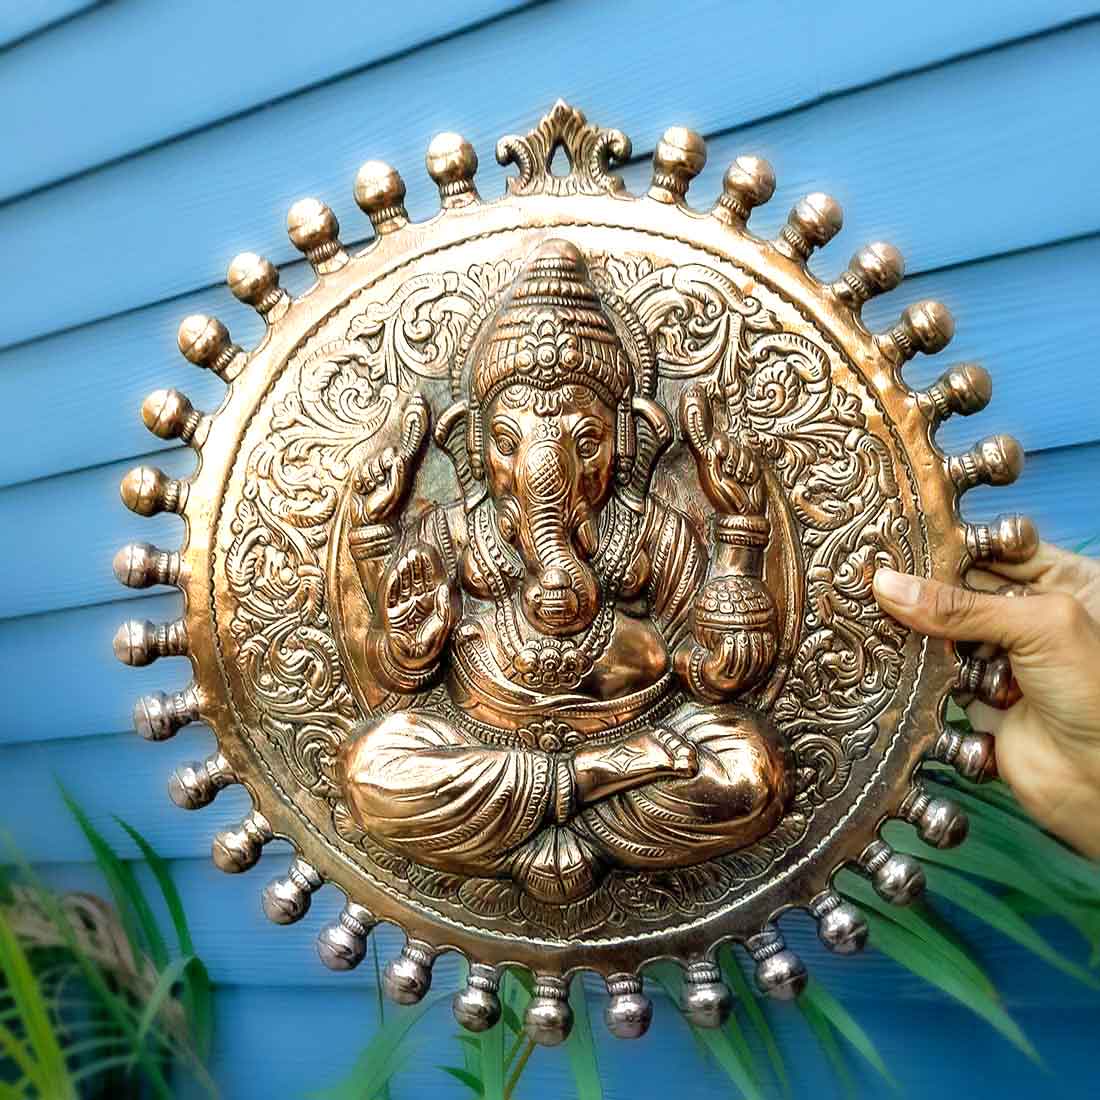 Ganesh Wall Hanging Statue | Lord Ganesha Wall Art - for Home, Puja, Living Room & Office | Antique Idol for Religious & Spiritual Decor  - 16 Inch